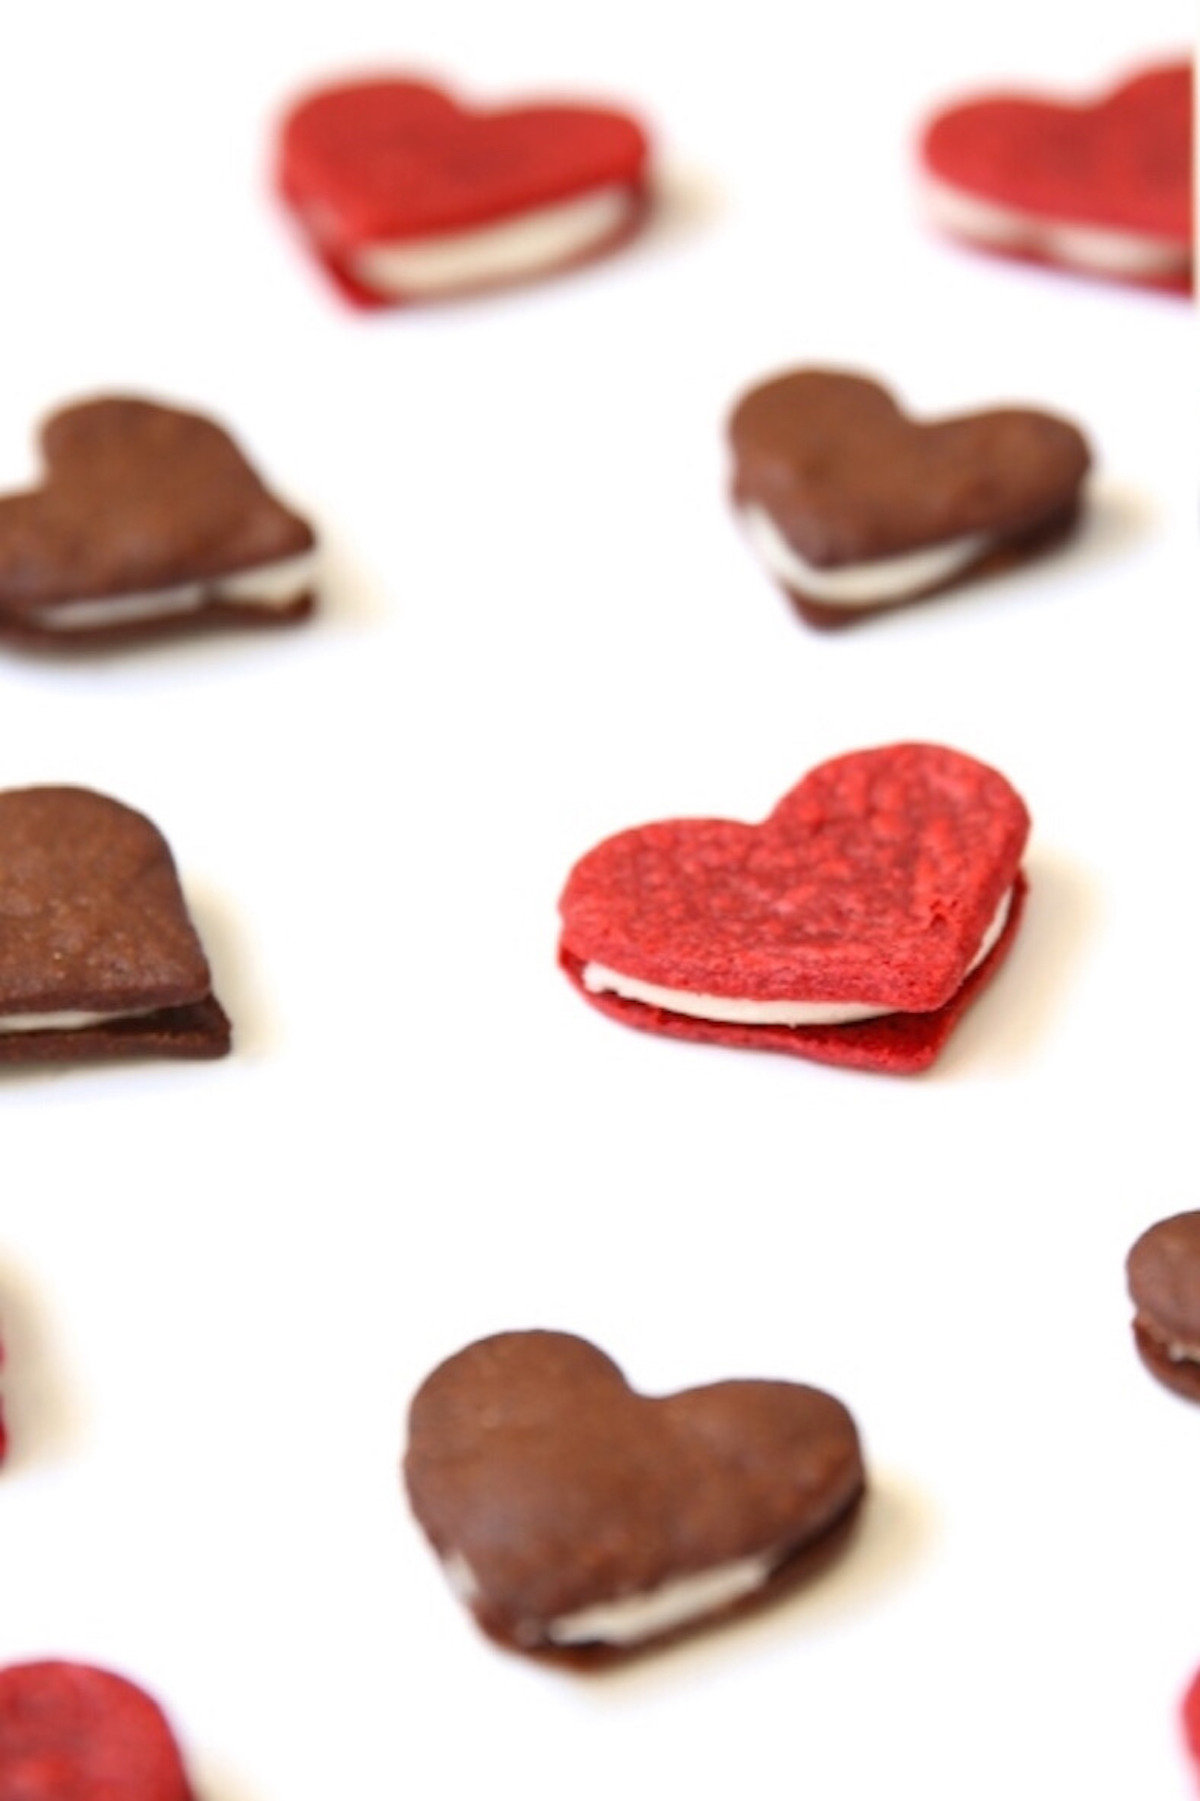 Indulge in some homemade oreos this Valentine's day.